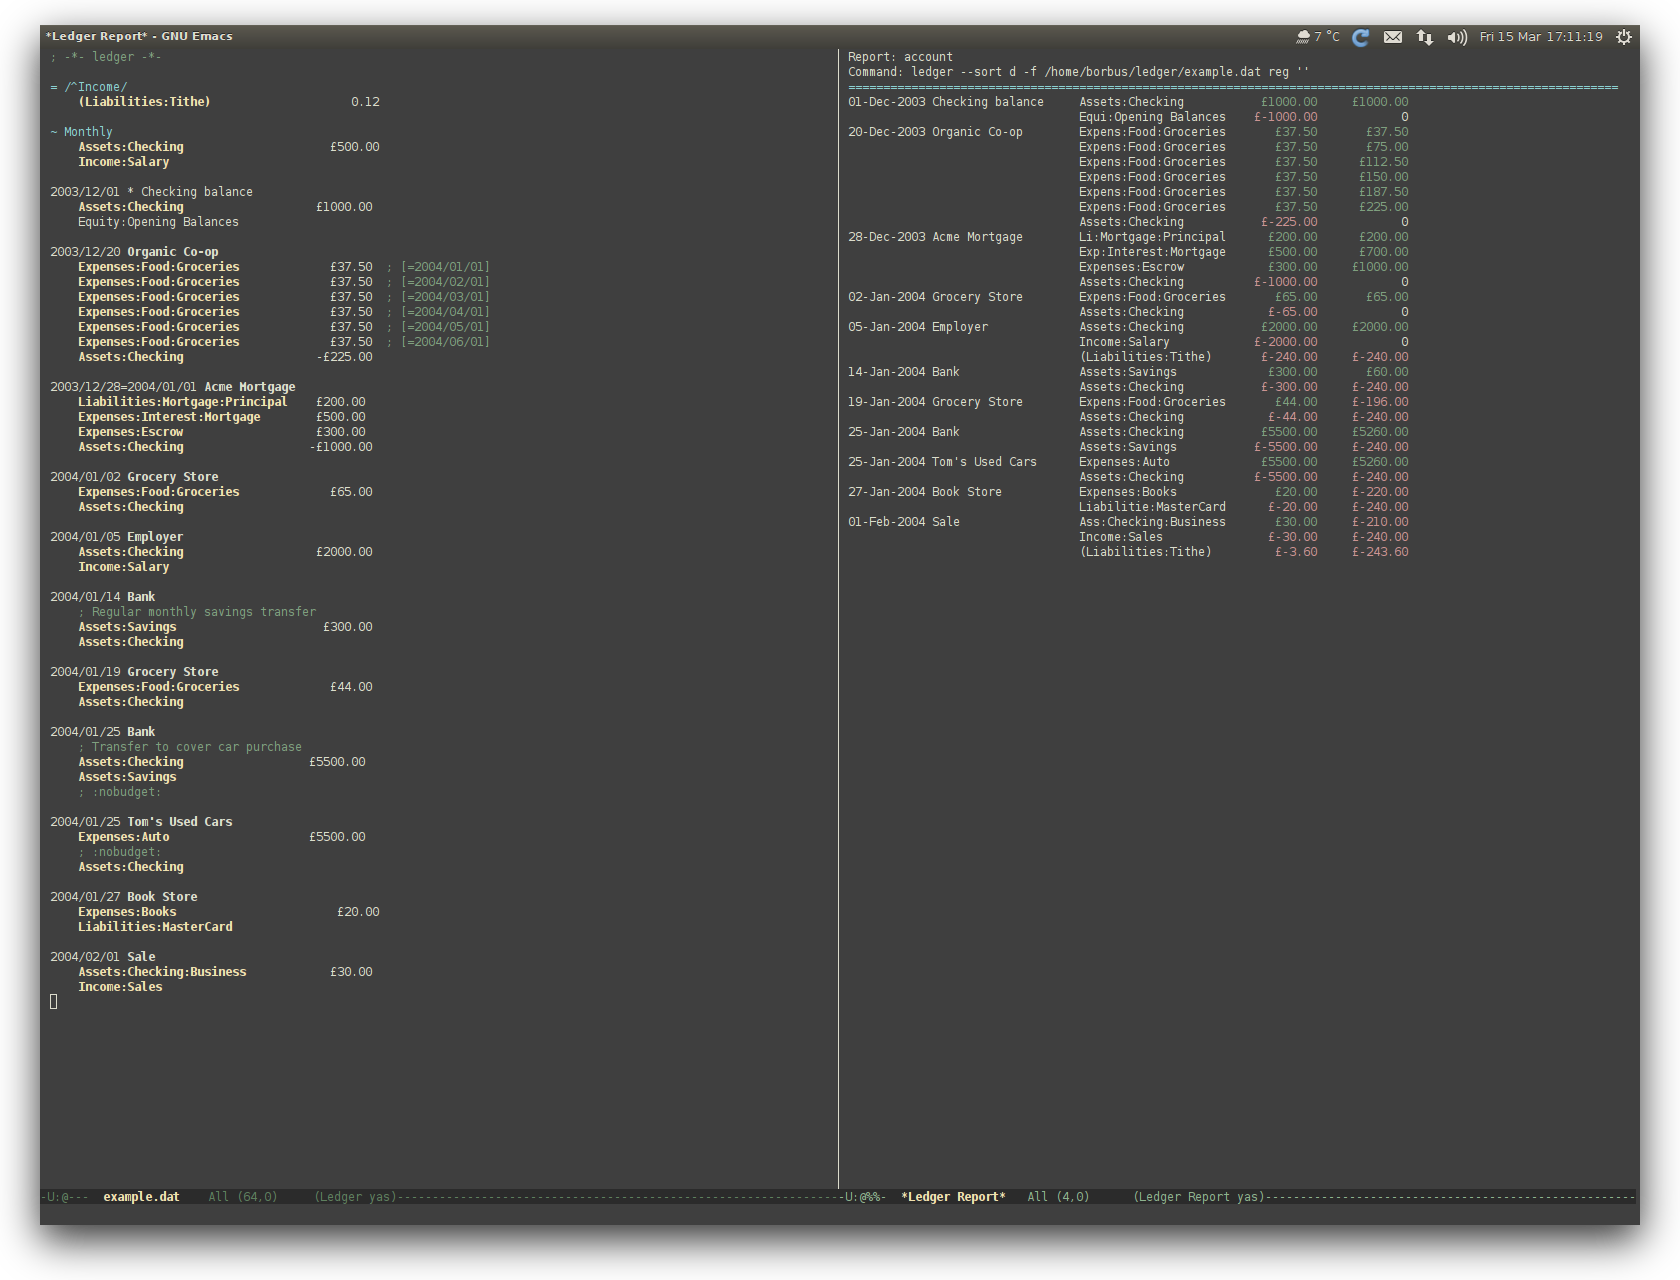 /TakeV/spacemacs/media/commit/11356be1e76566275070df11611e0a0072213fec/layers/+tools/finance/img/ledger.png